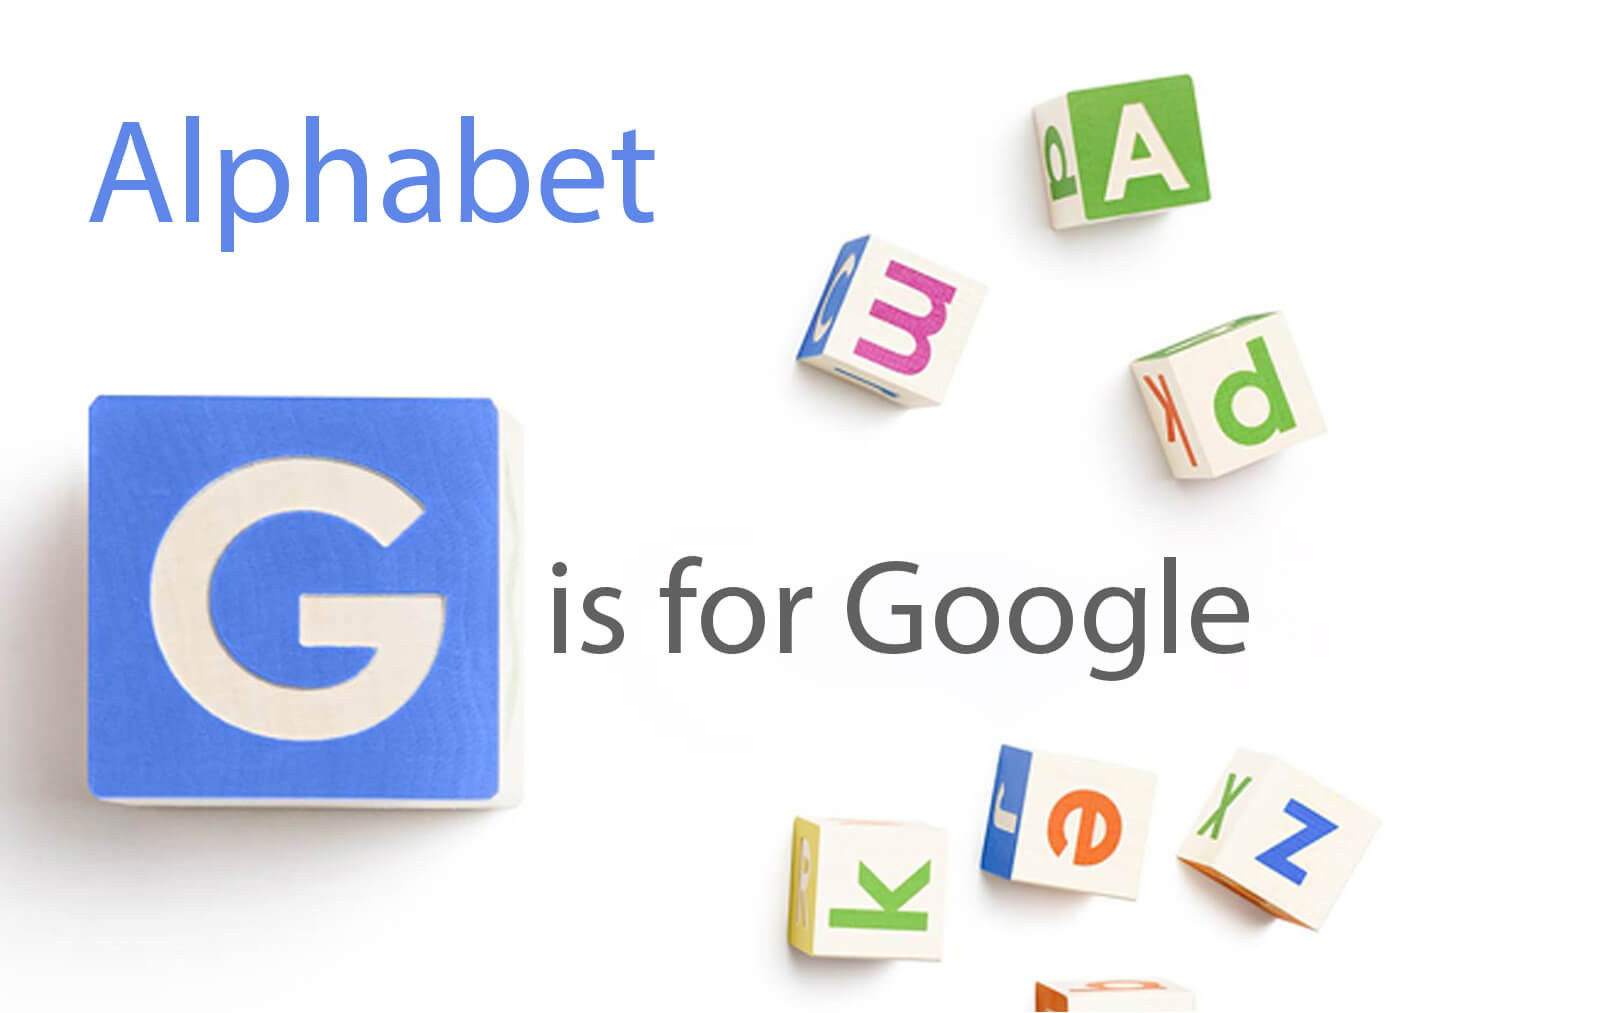 Google restructures to become alphabet